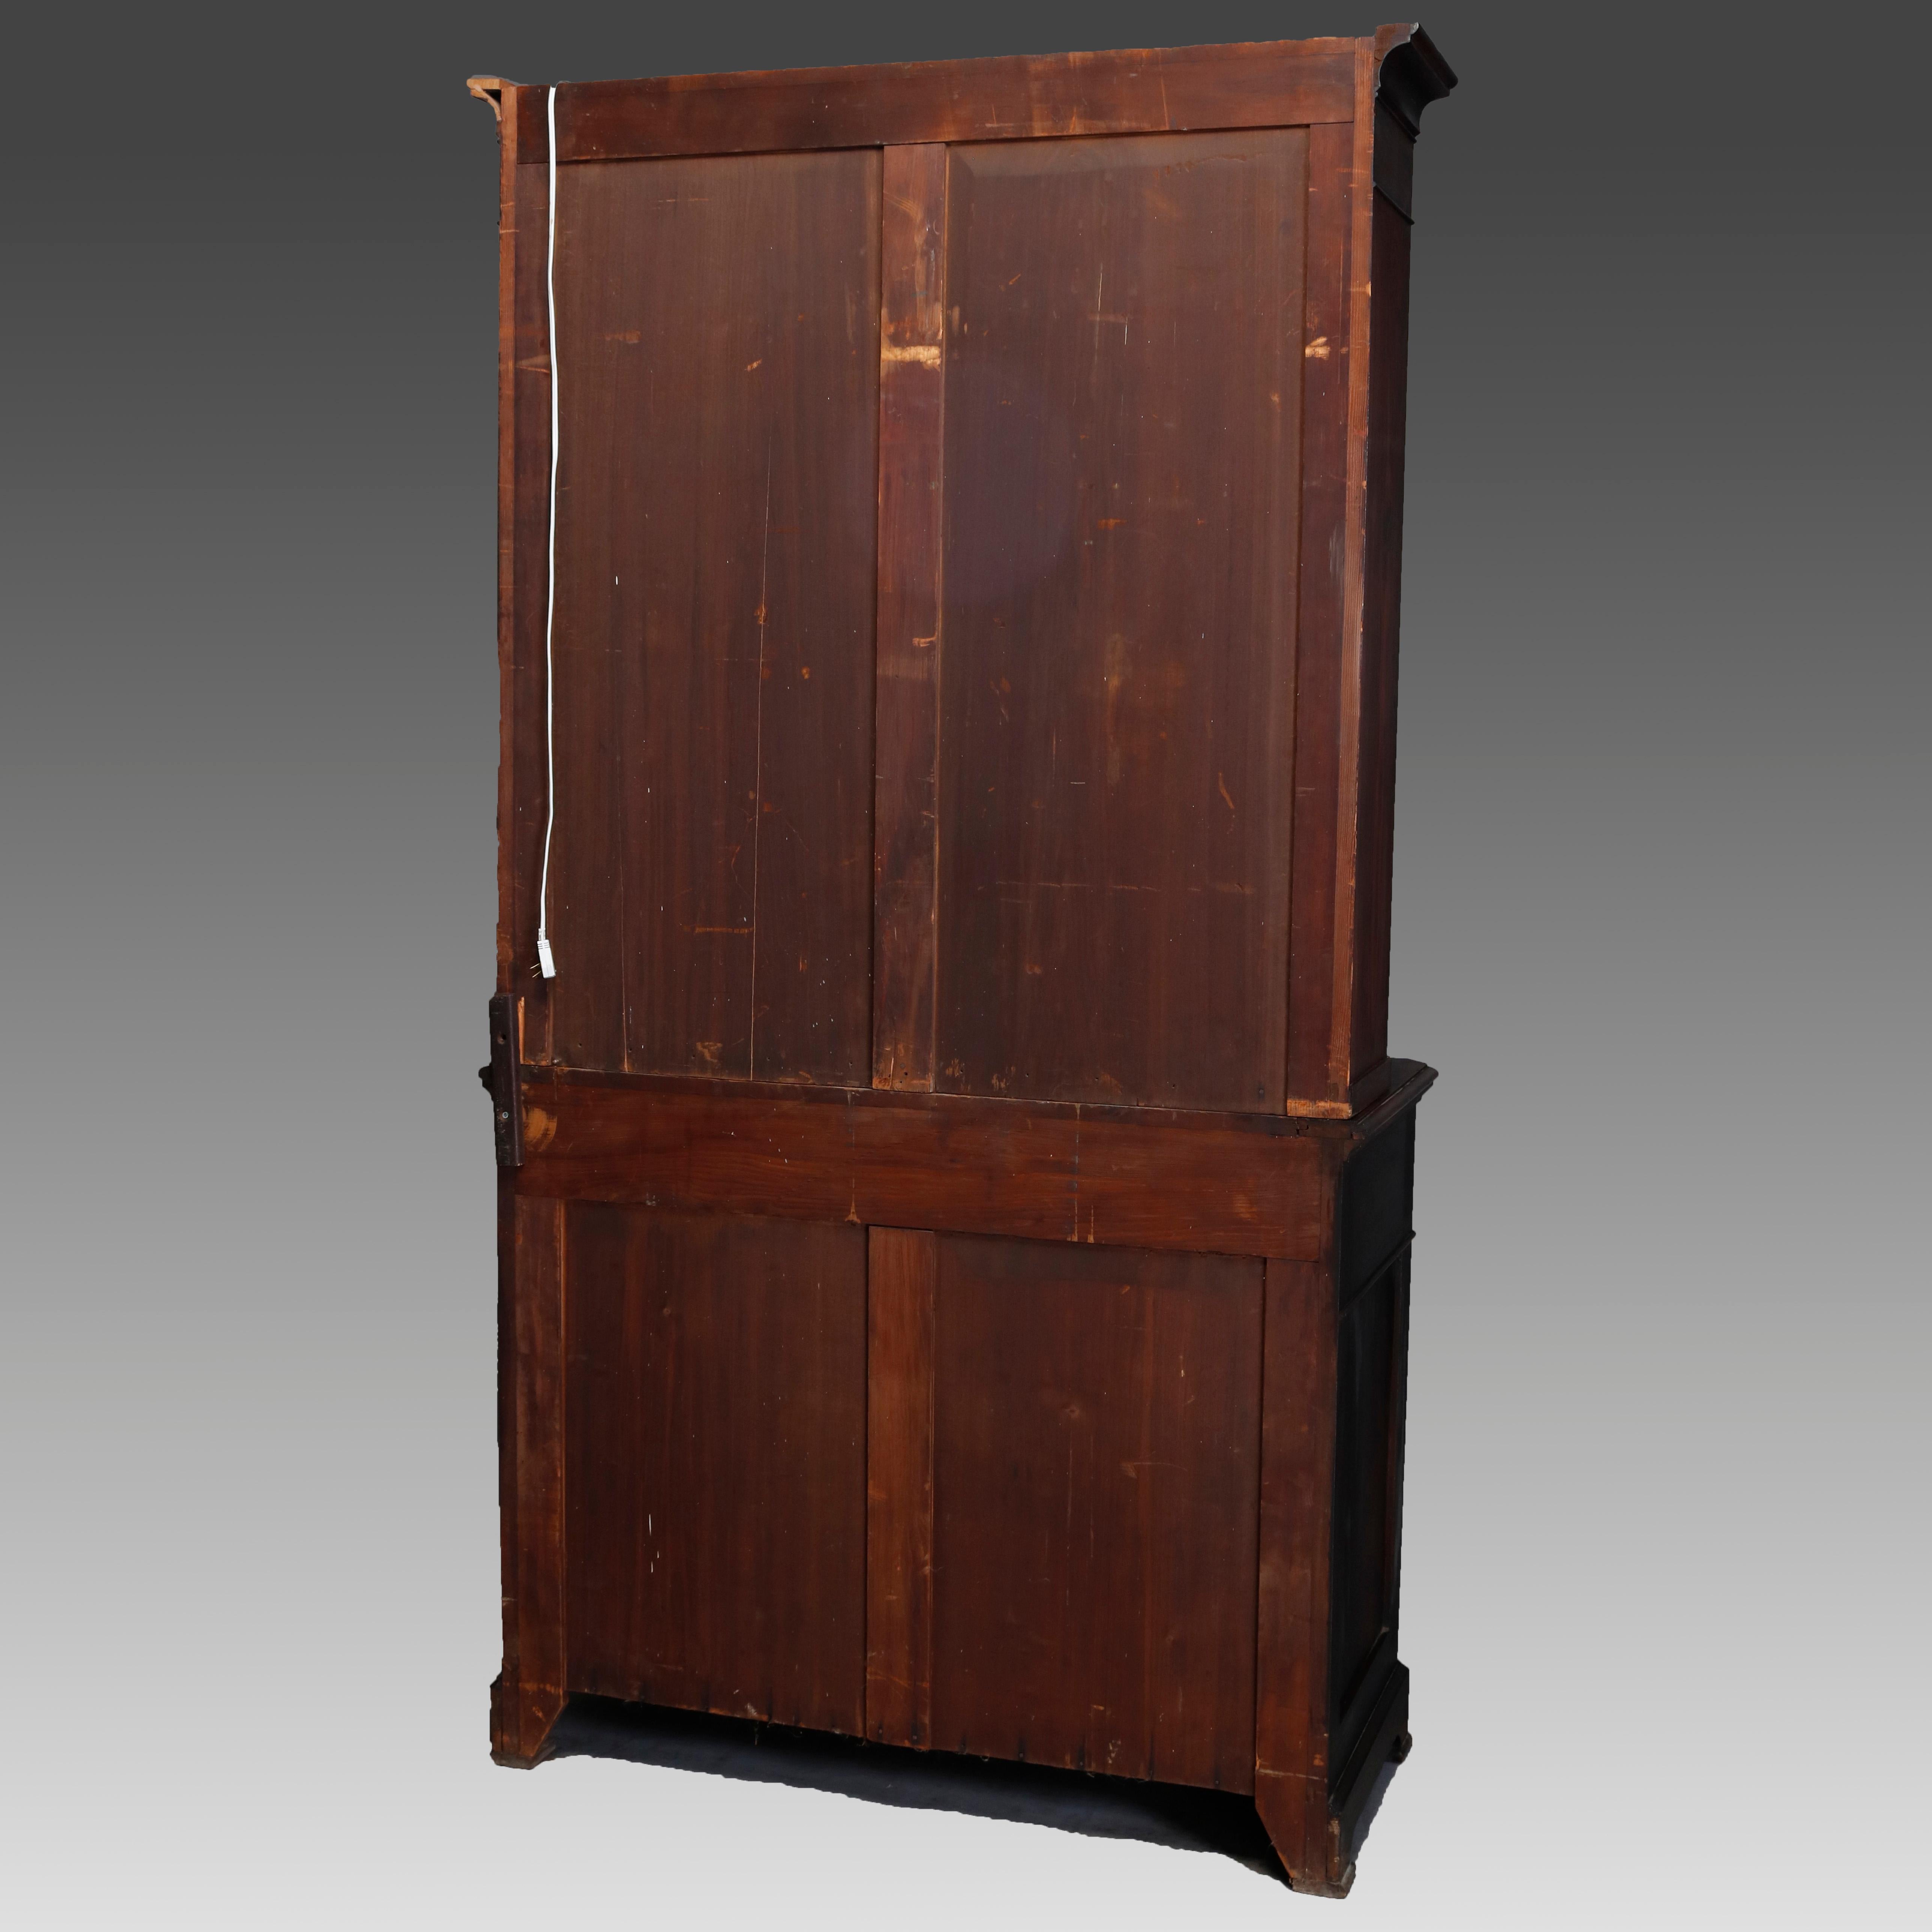 Antique Victorian Rosewood Secretary Drop Front Desk with Bookcase, circa 1870 10